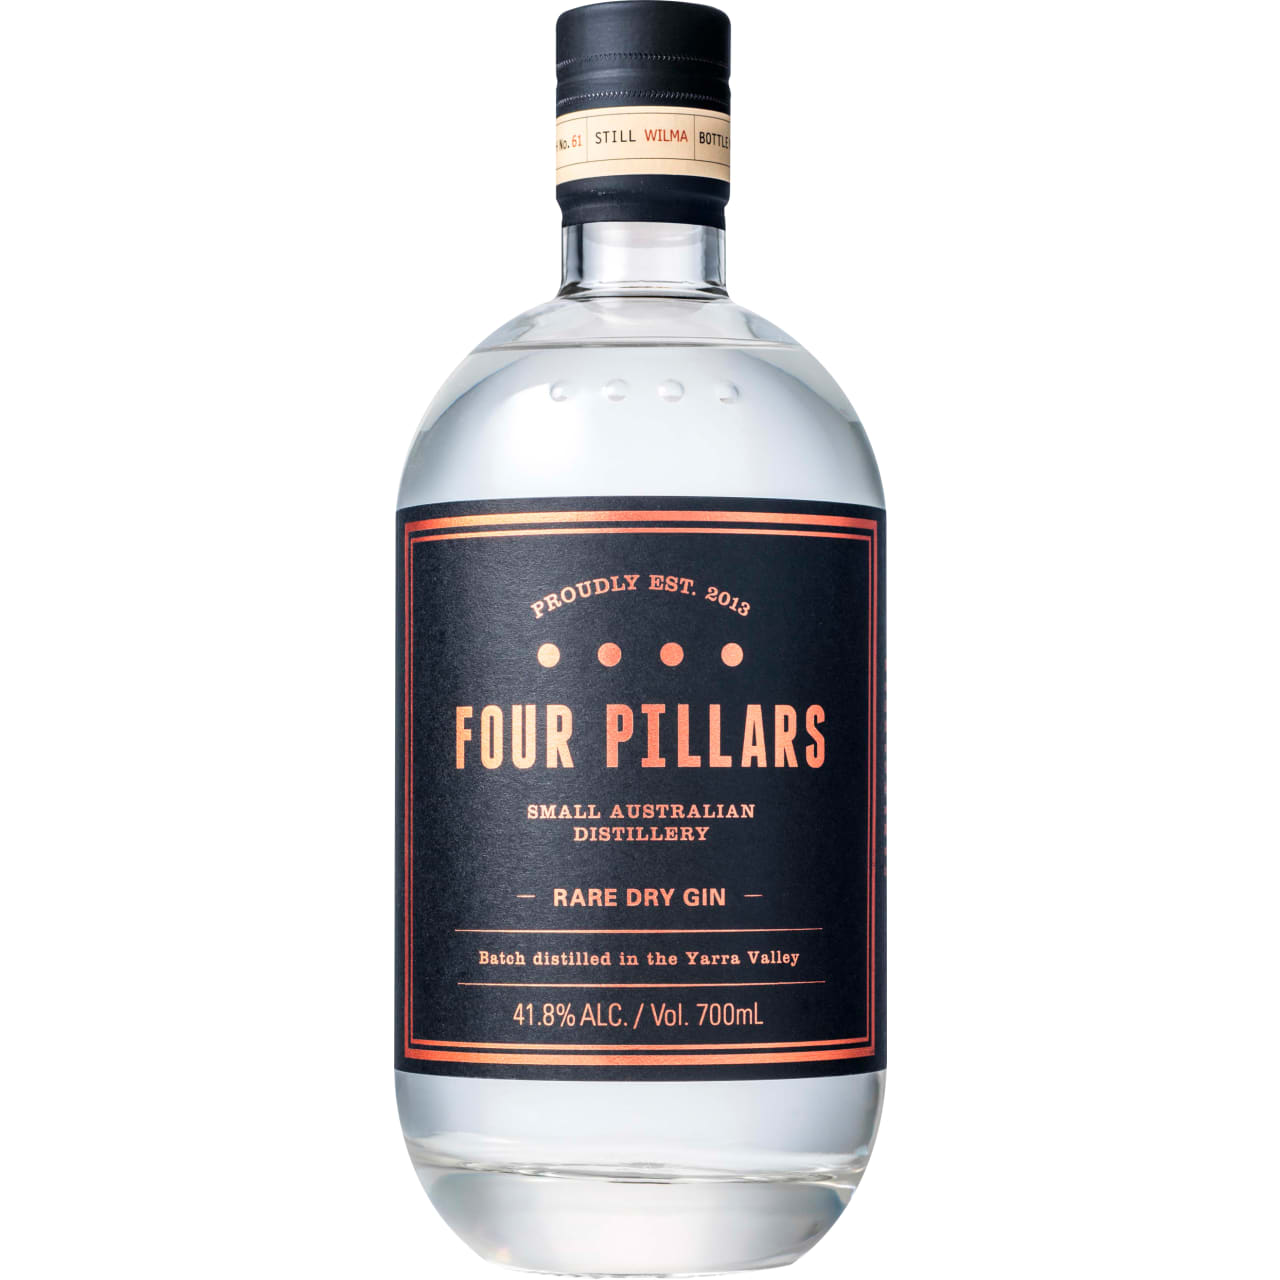 Rare Dry Gin is Four Pillars original gin. They crafted it to deliver the best of all worlds: a classically smooth gin that combines Asian botanicals with great Mediterranean citrus.